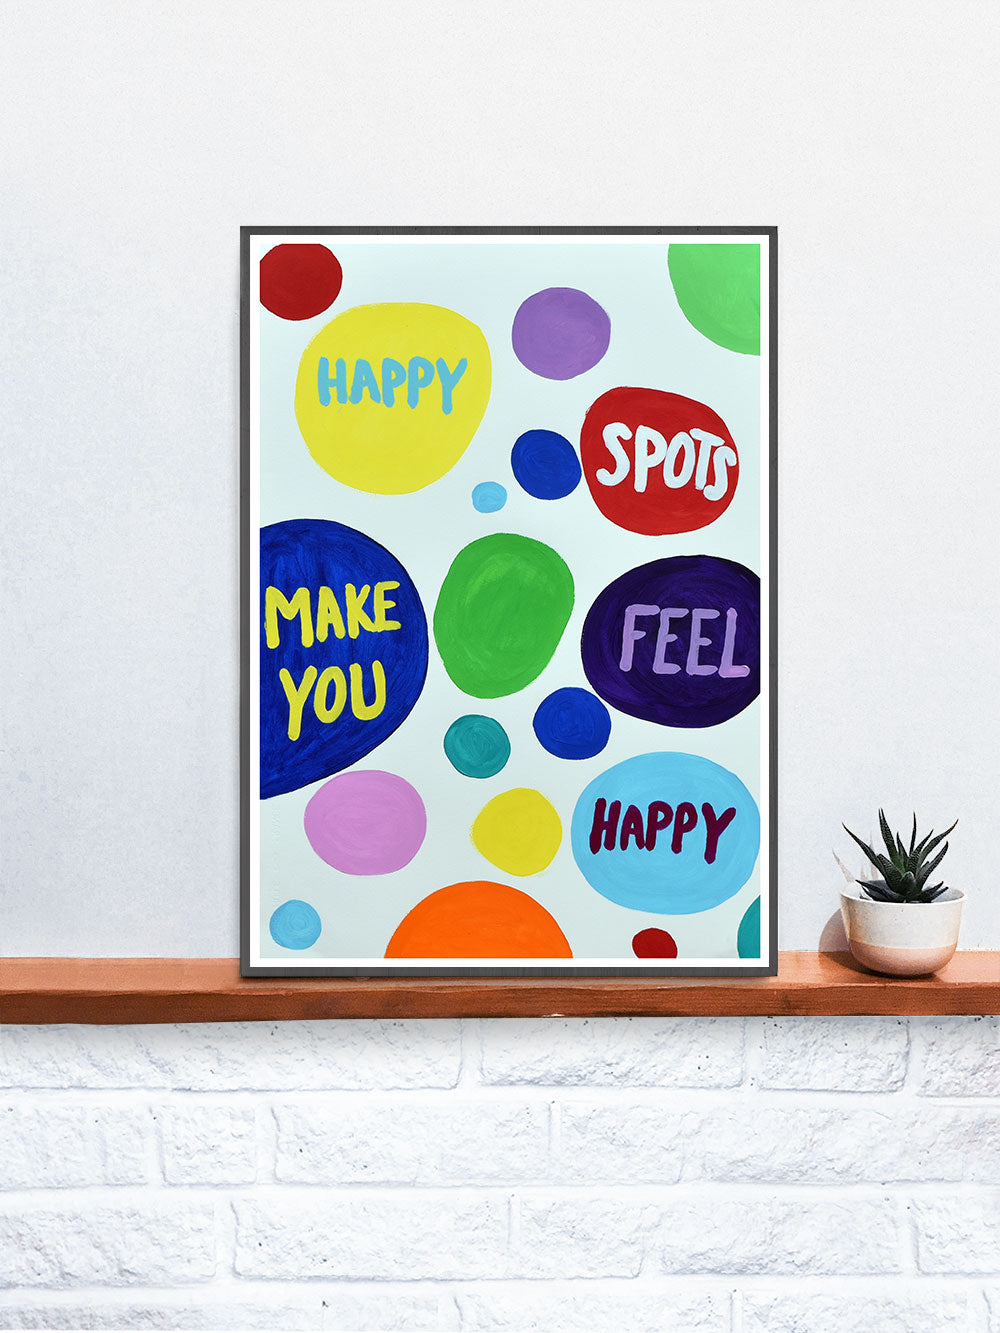 Happy Spots Quirky Print on a Shelf